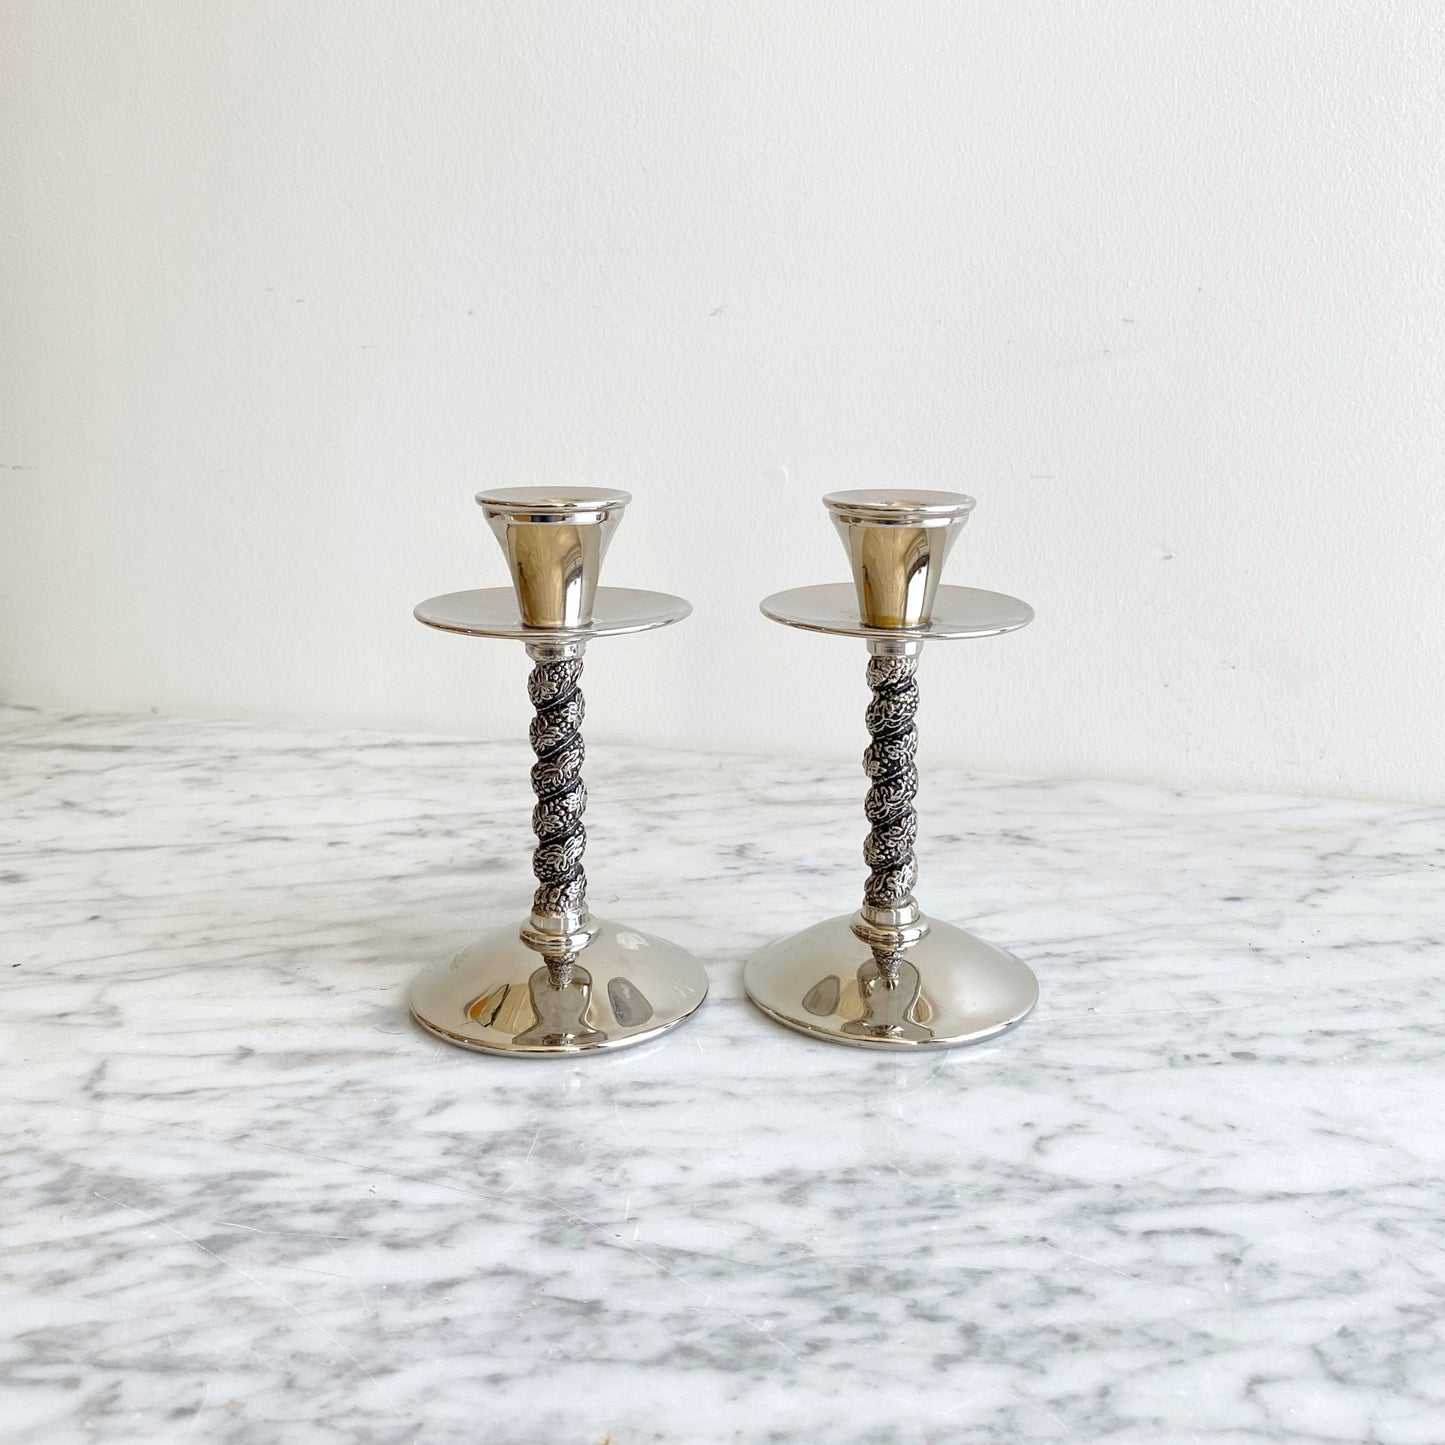 Pair of Vintage Silver-plate Candle Holders, Spain